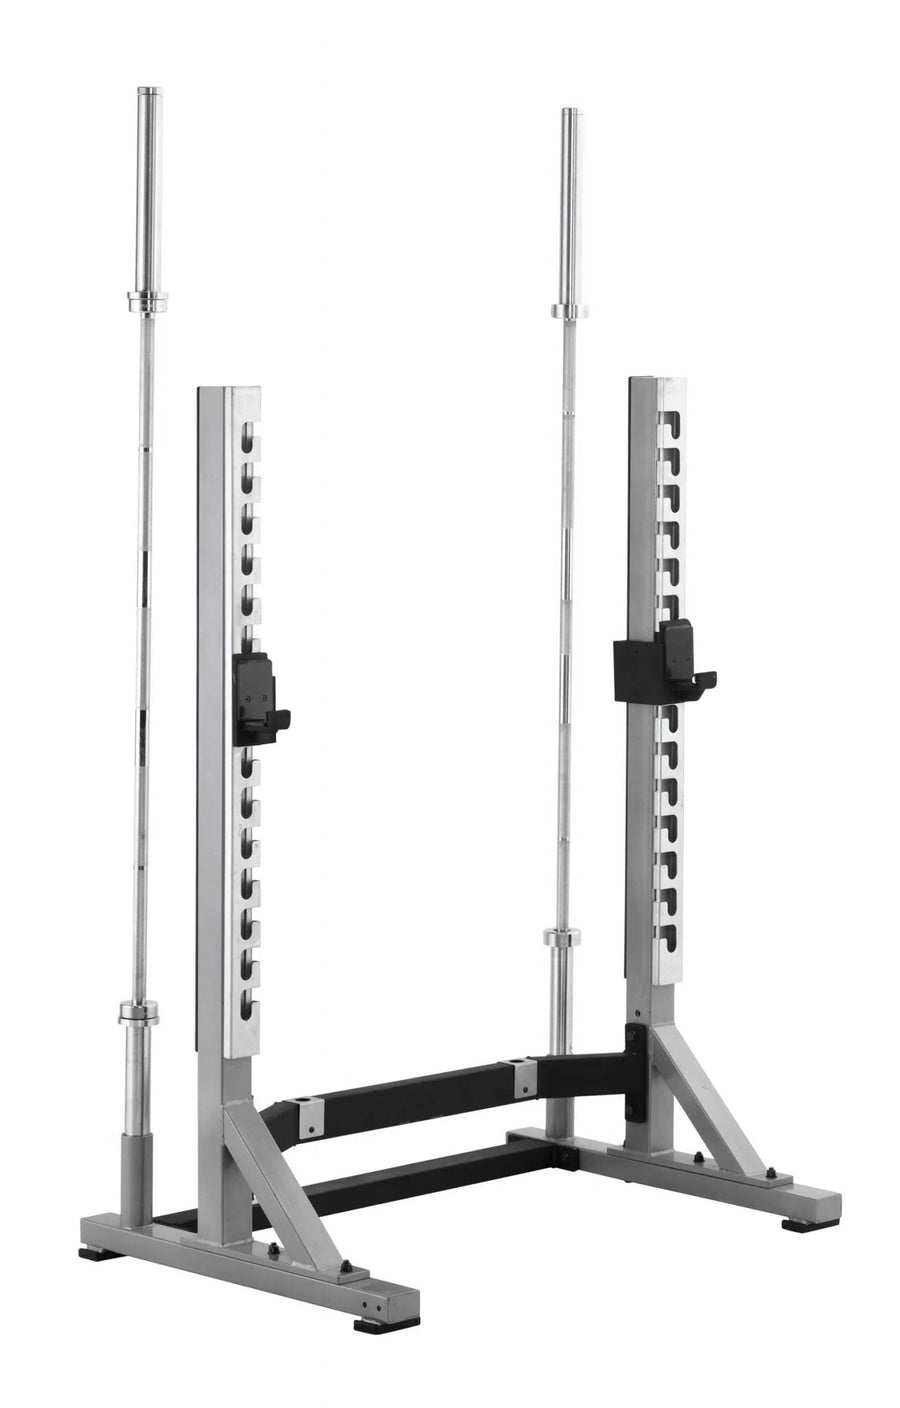 York Barbell STS Collegiate Squat Rack 55054 Muscle and Strength Training Solution Healthy and Safe Workout